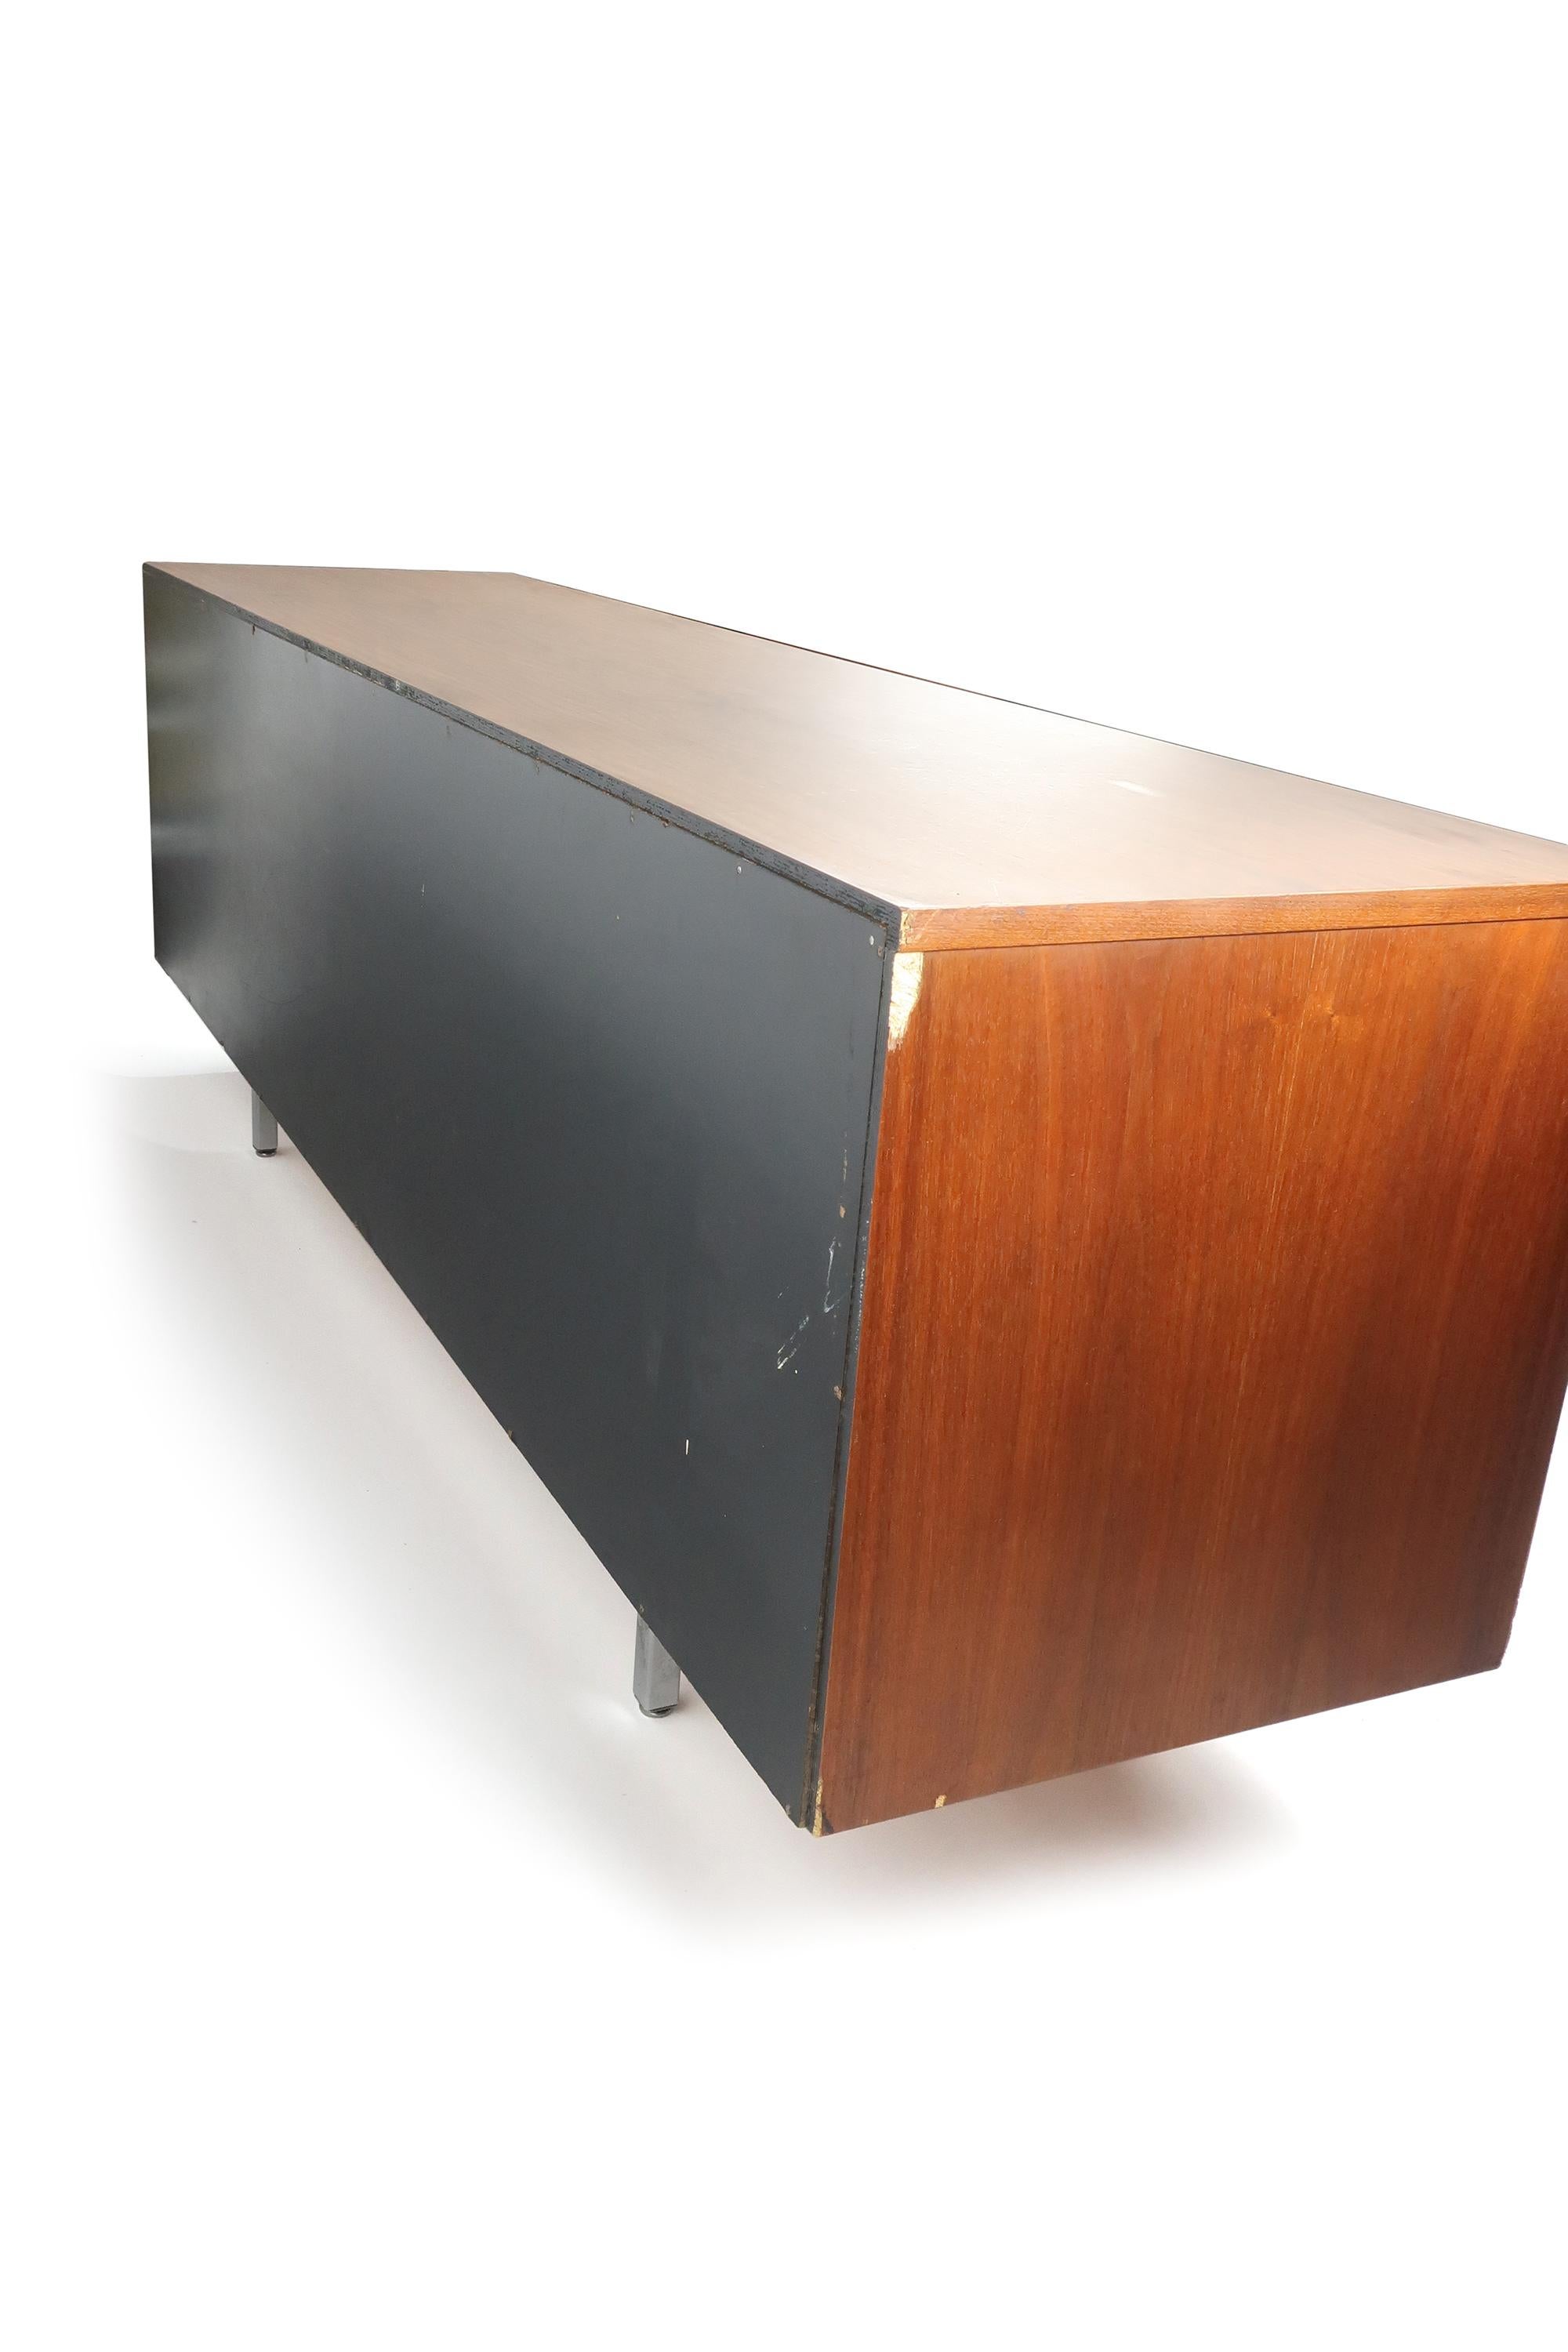 George Nelson for Herman Miller Walnut Executive Office Group Credenza (Walnuss)